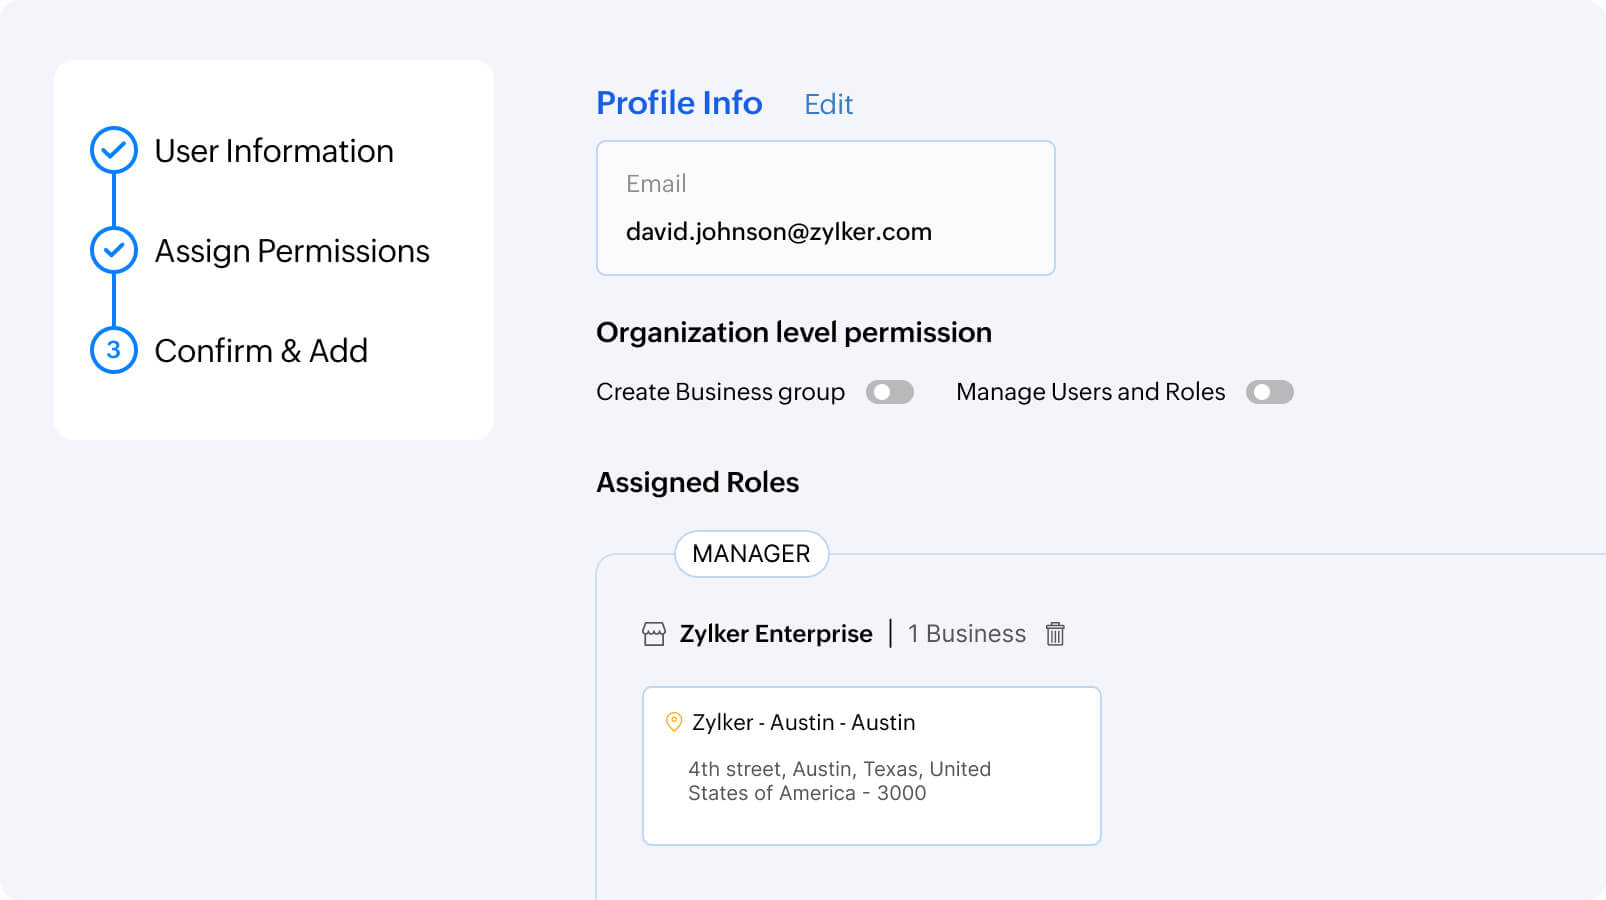 Custom roles to control user access and actions